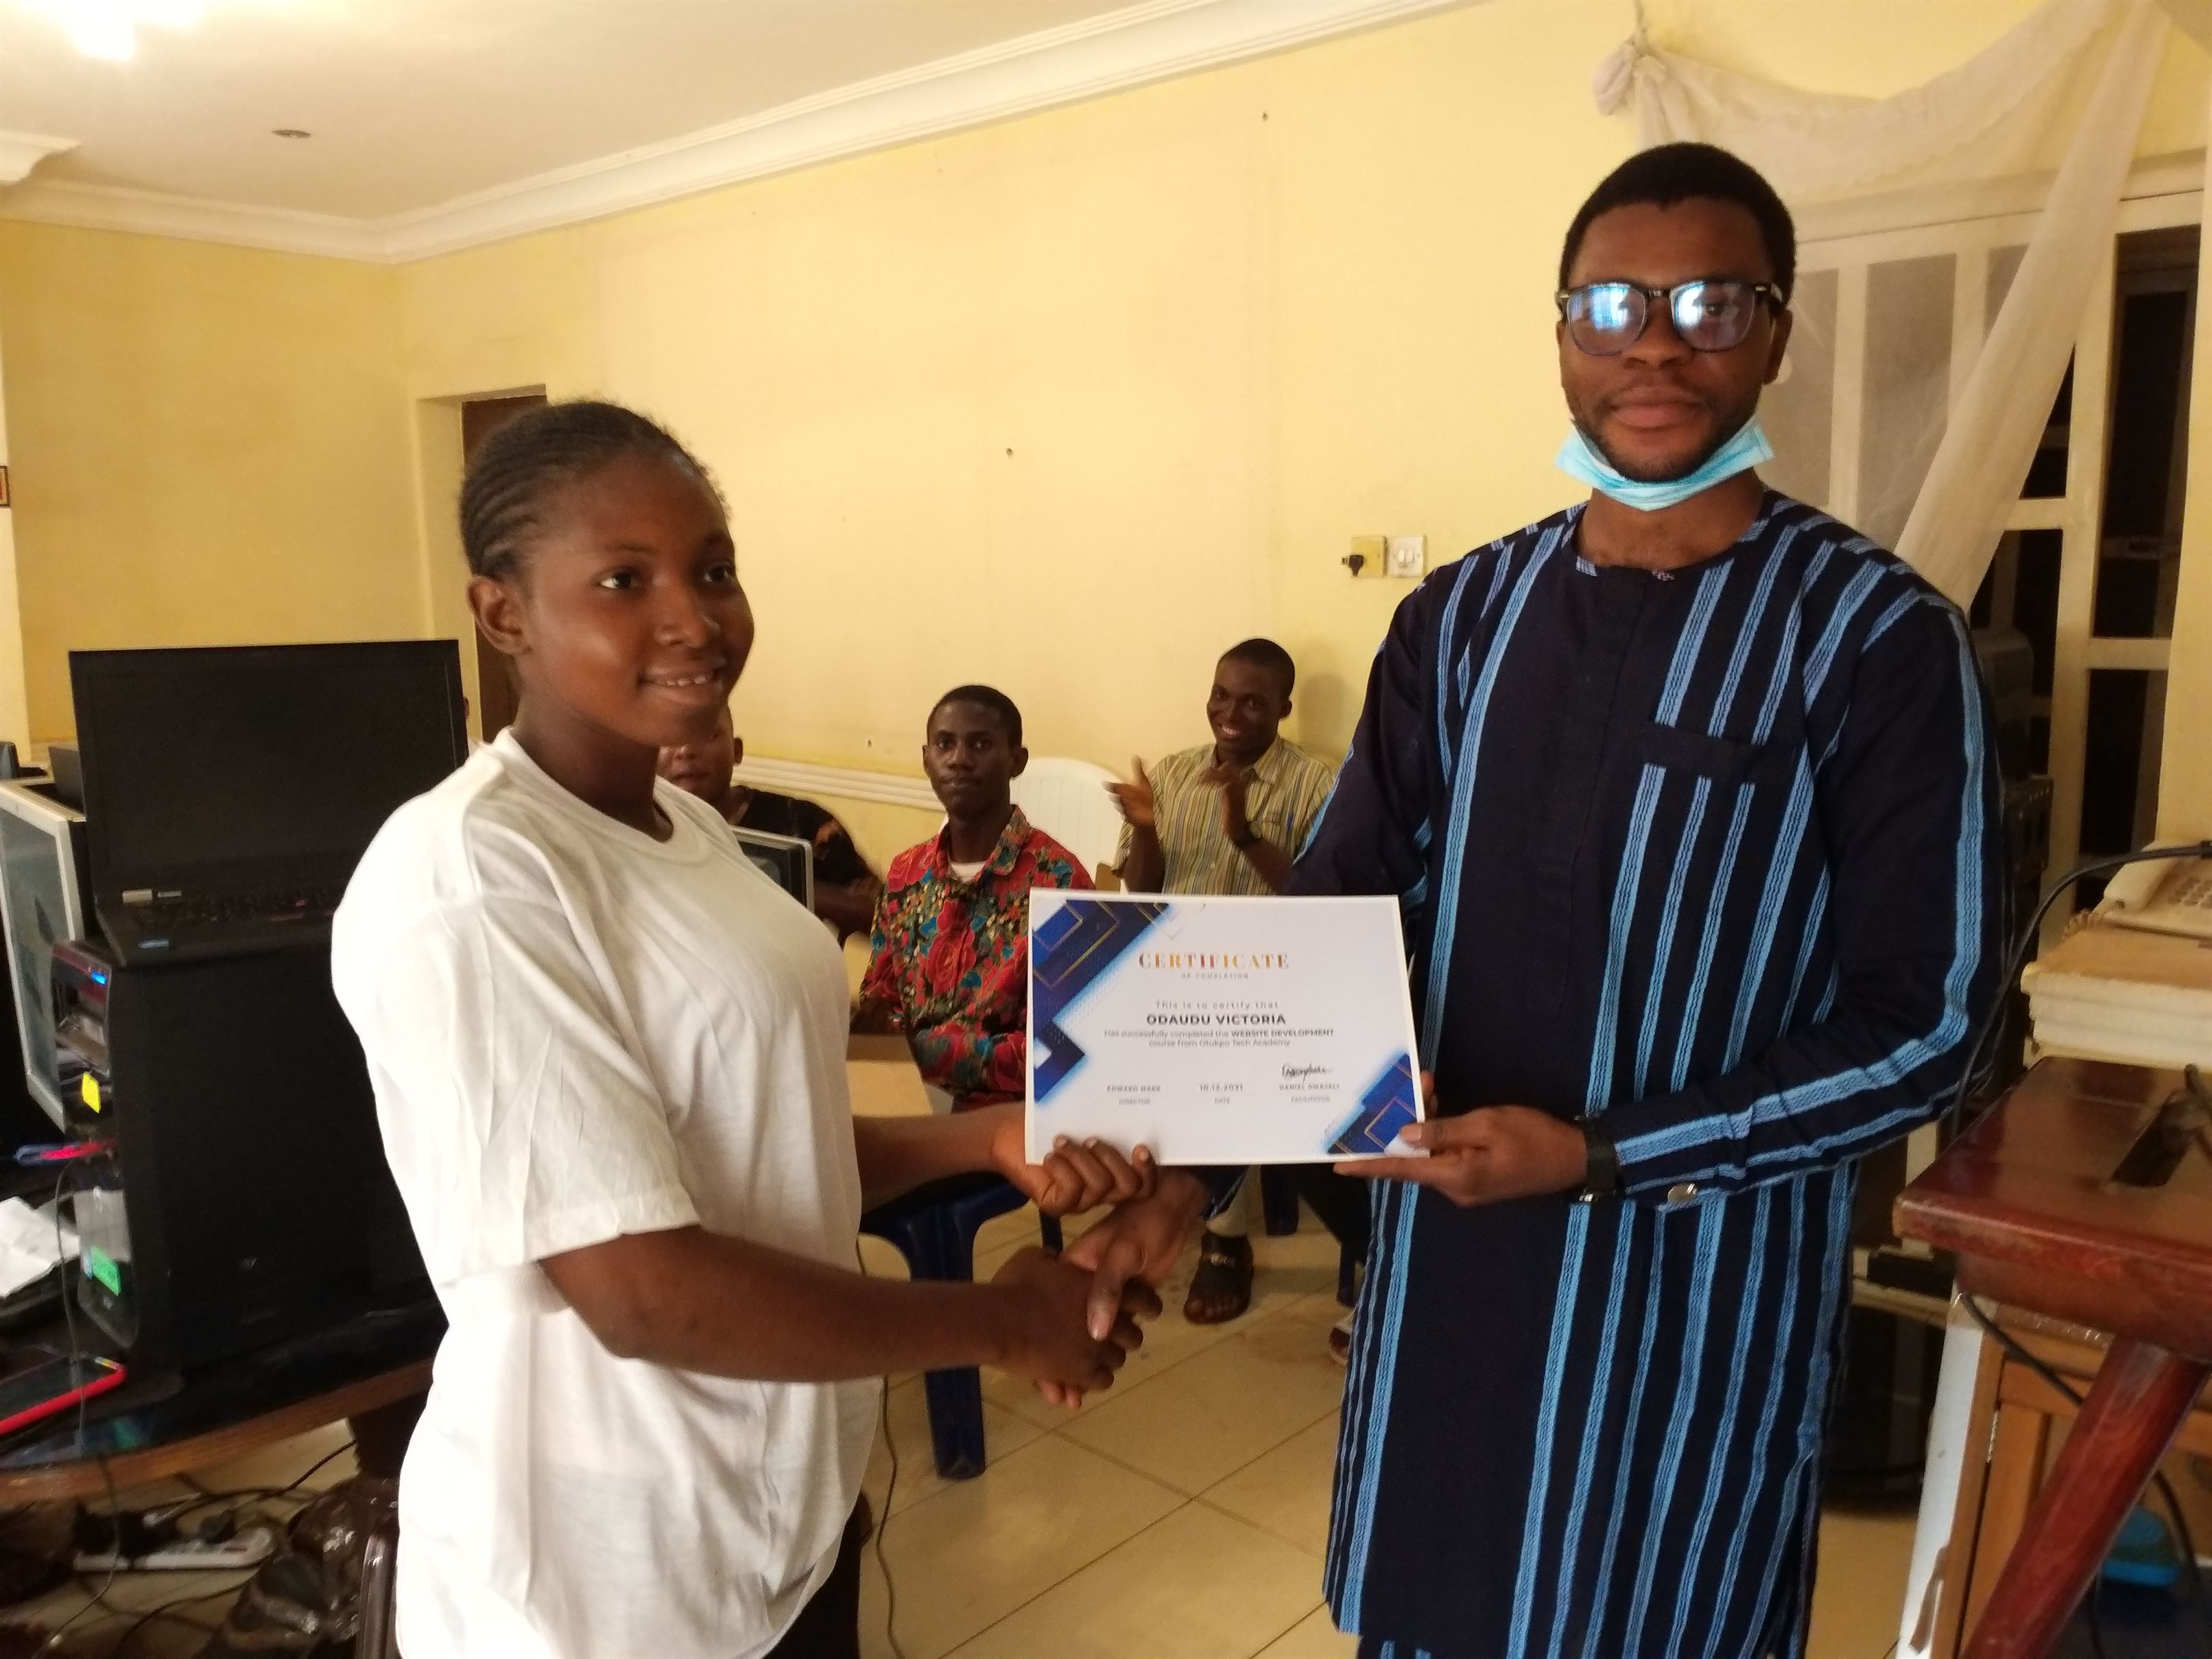 Students awarded certificates